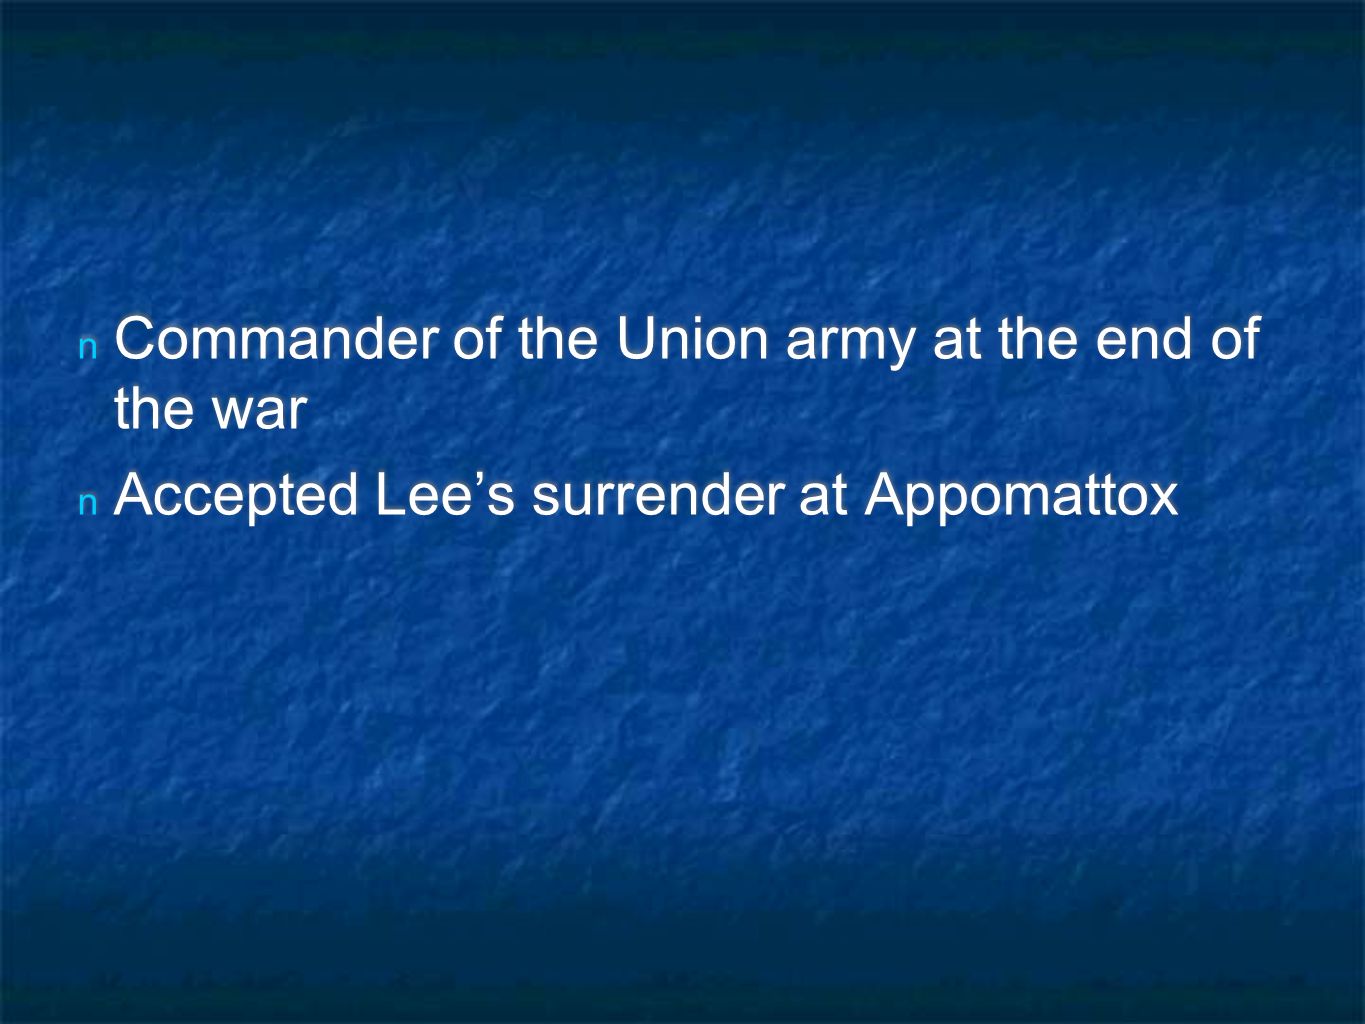 n Commander of the Union army at the end of the war n Accepted Lee’s surrender at Appomattox n Commander of the Union army at the end of the war n Accepted Lee’s surrender at Appomattox